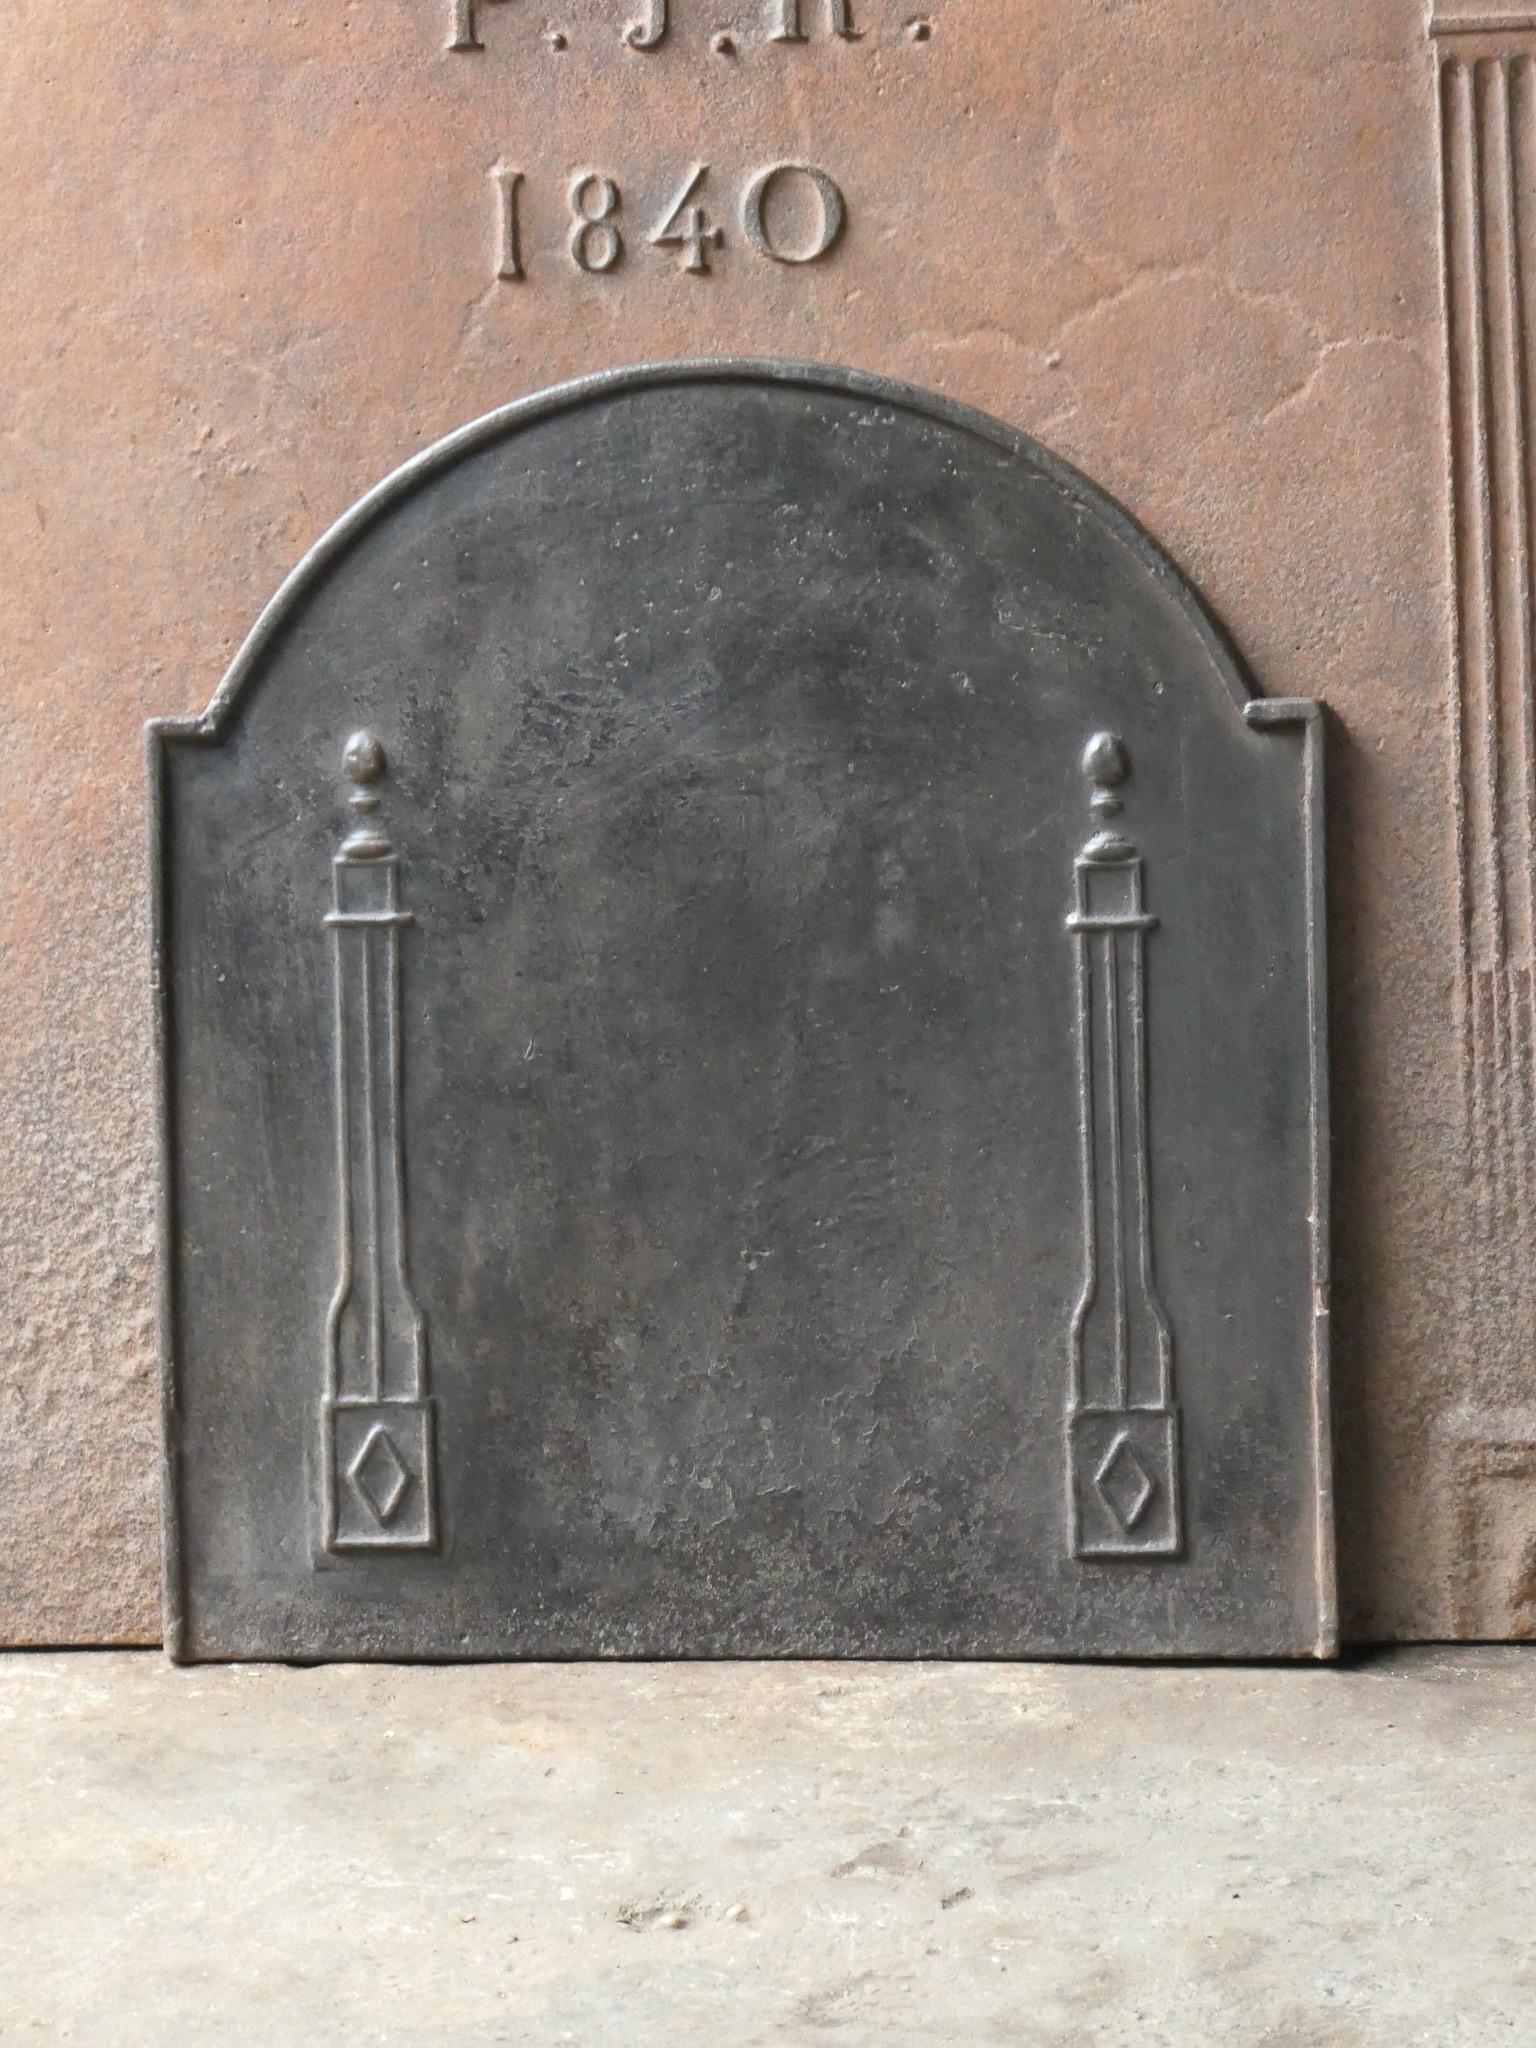 18th - 19th century French neoclassical fireback with two pillars of freedom. The pillars symbolize the value liberty, one of the three values of the French revolution. 

The fireback is made of cast iron and has a natural brown patina. Upon